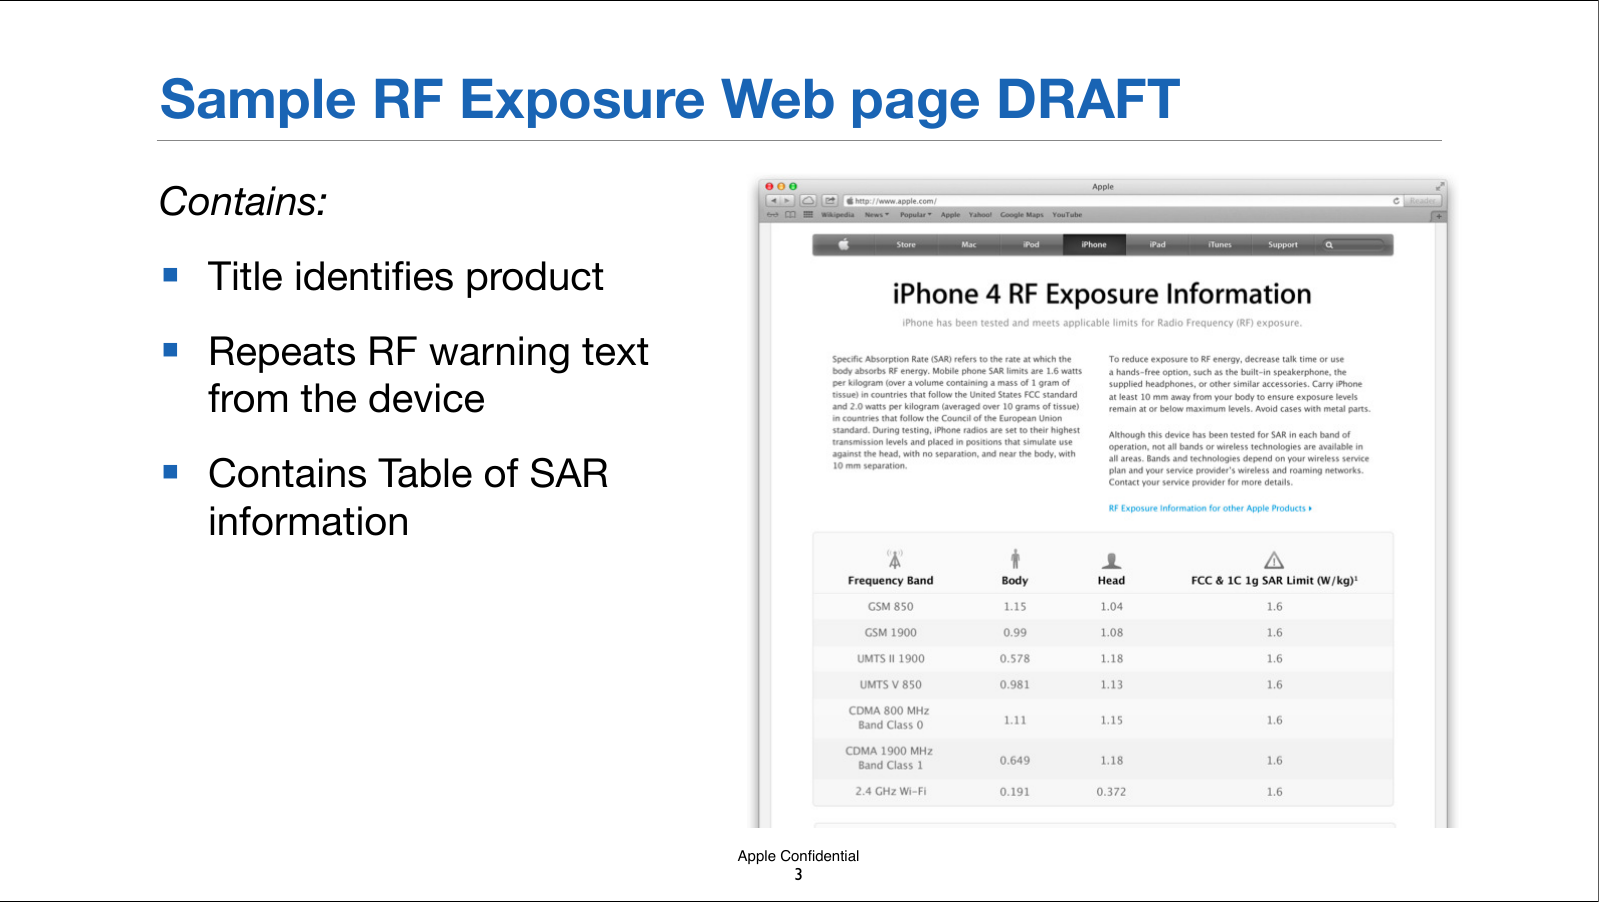 Apple ConﬁdentialSample RF Exposure Web page DRAFT3Contains:■Title identiﬁes product■Repeats RF warning text from the device■Contains Table of SAR information